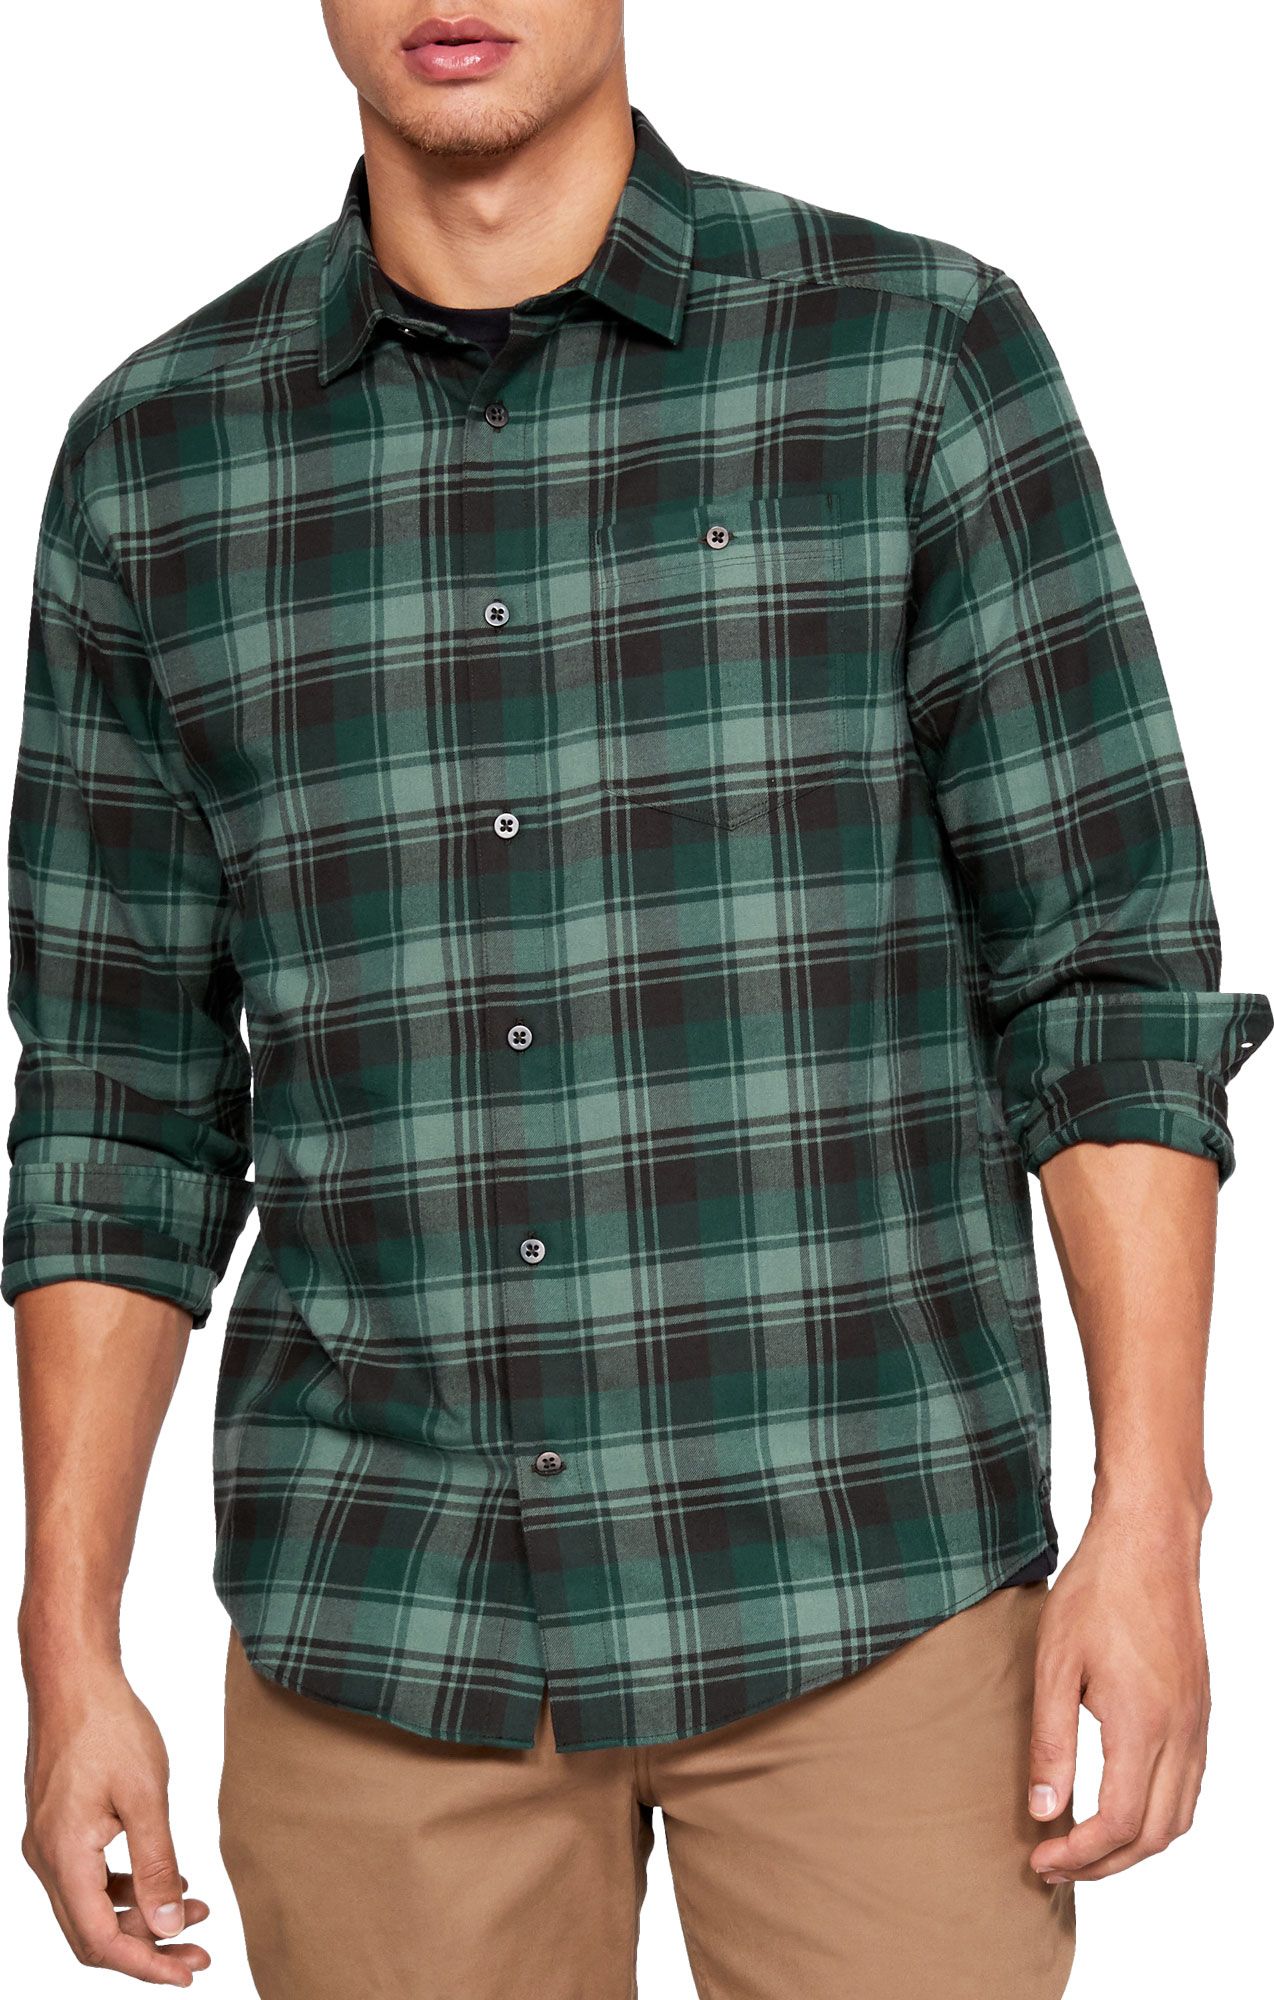 under armour flannel shirts